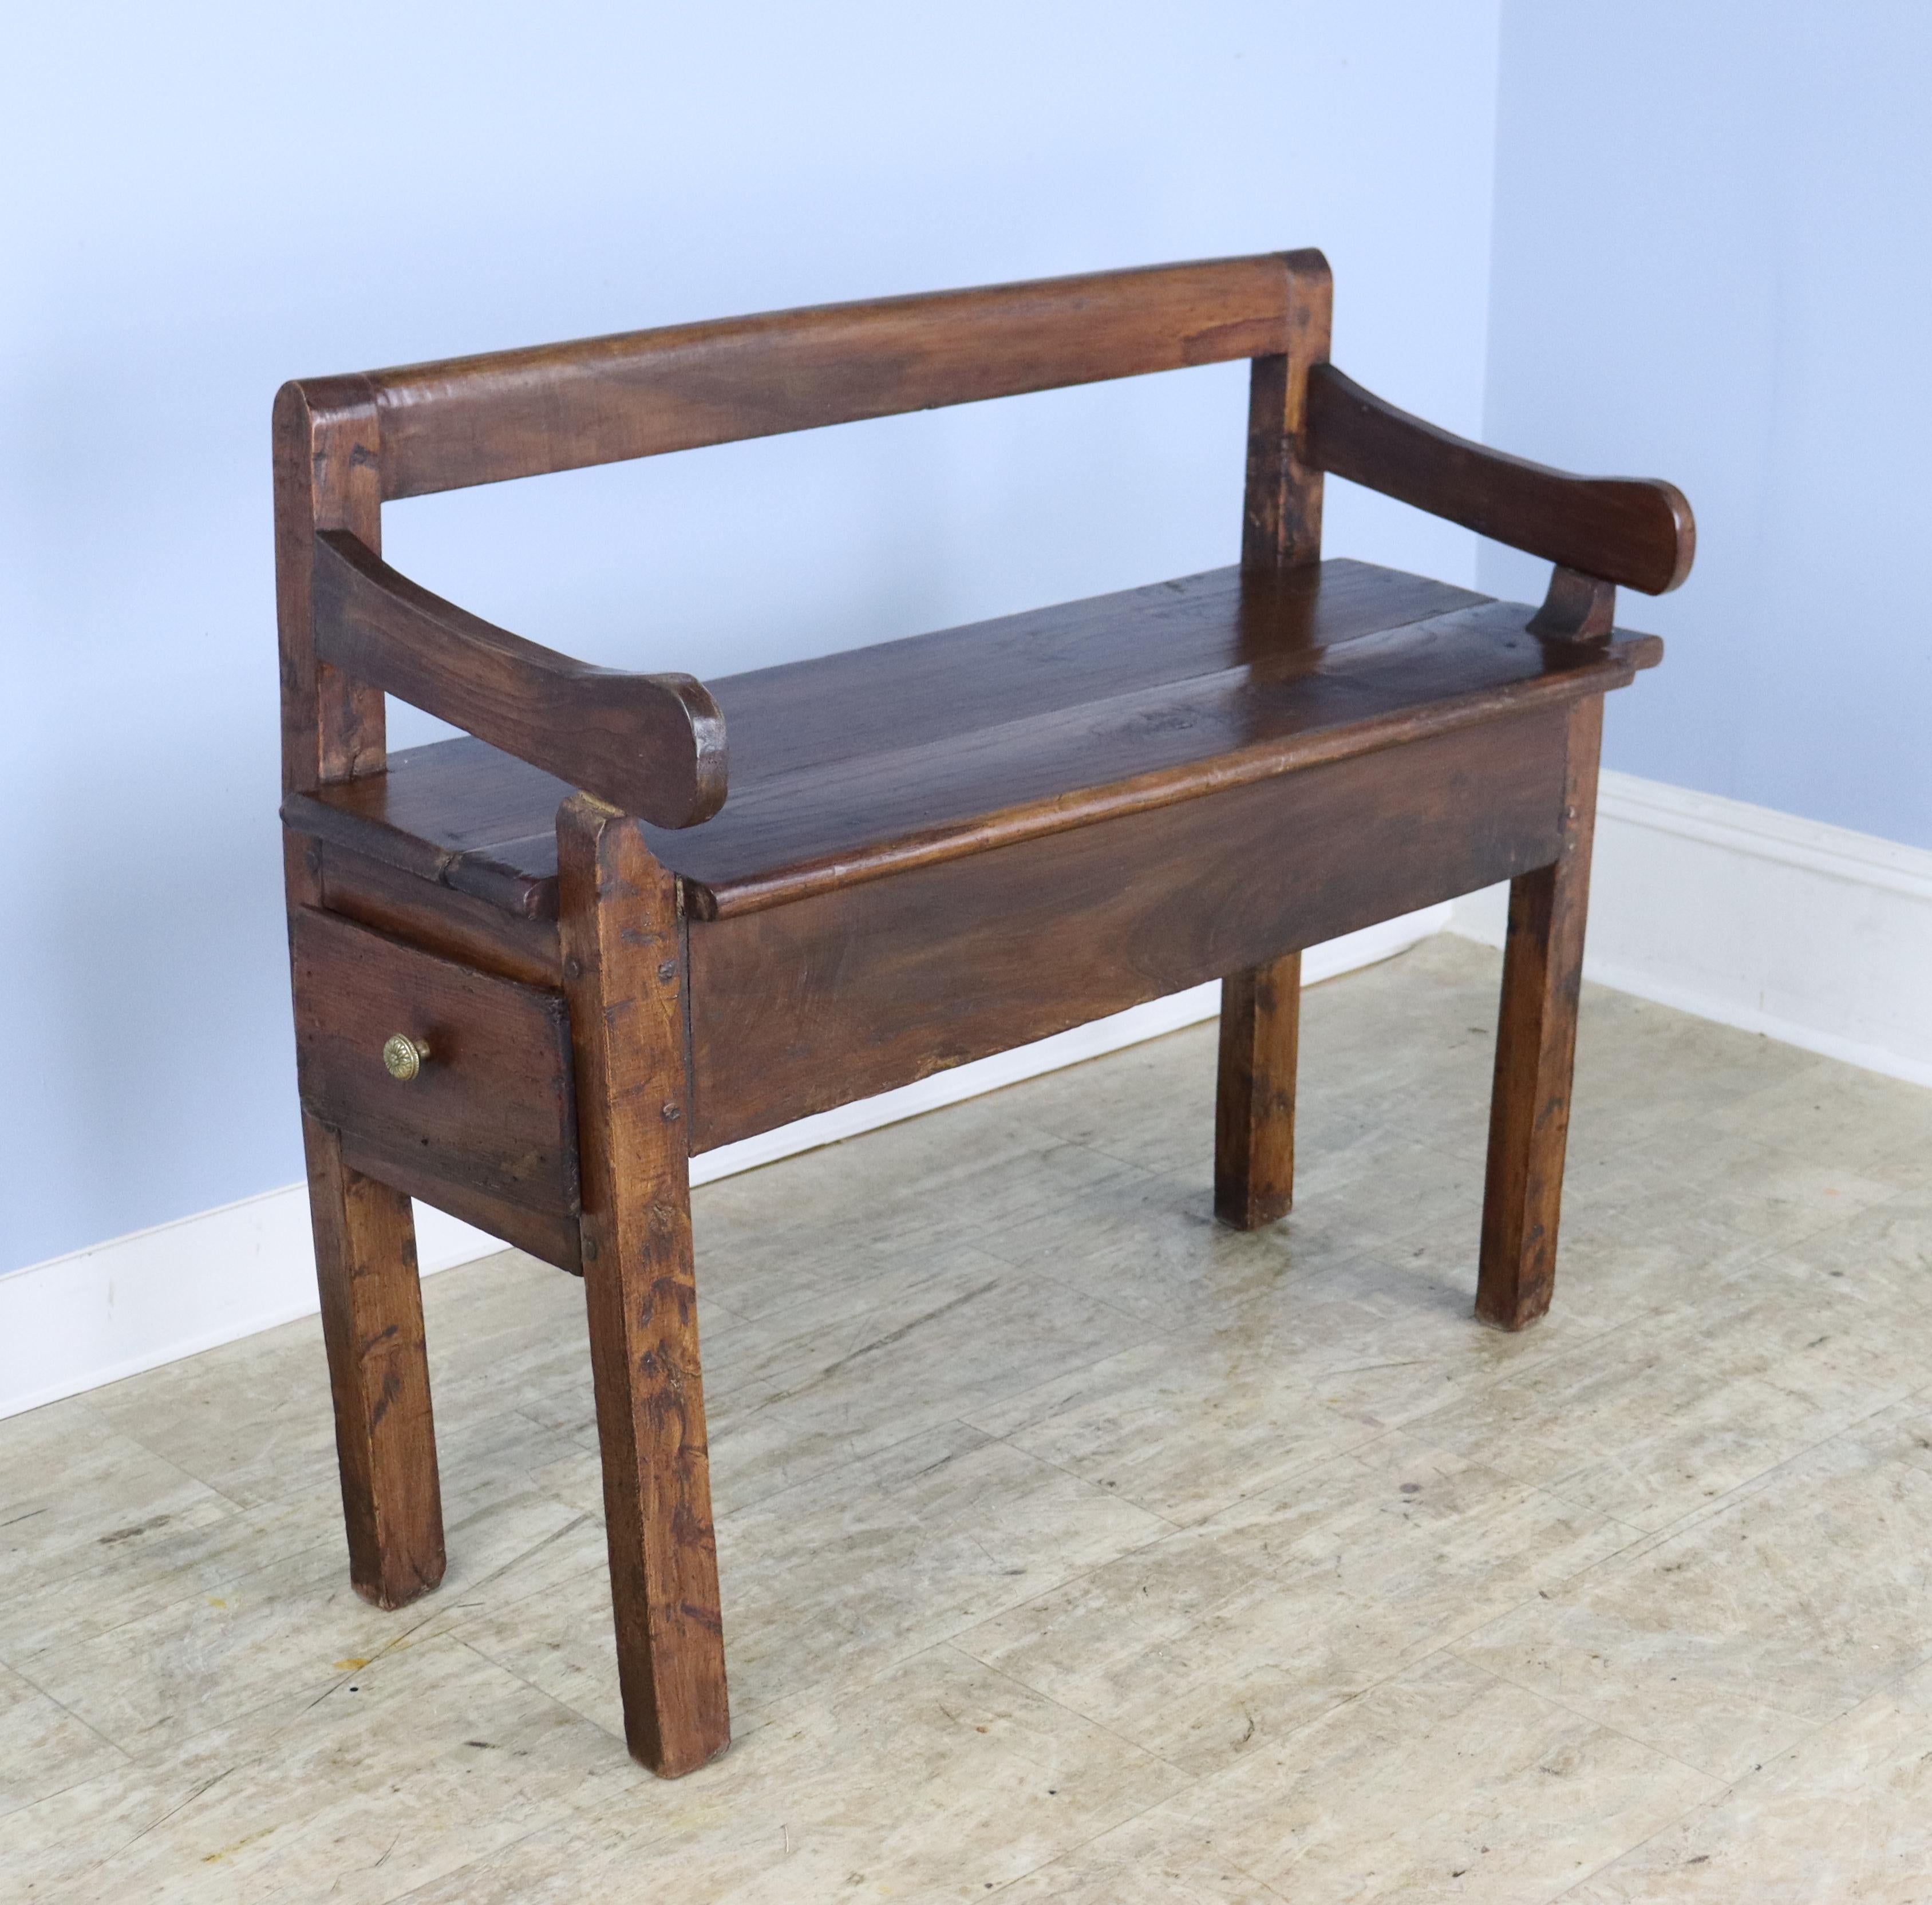 A small handmade French bench in glossy chestnut with a long drawer in the seat.  The irregular planks and quirky silhouette add charm, and have no effect on the stability of the piece.  No wobbling!  Good chestnut color and patina.  Quite